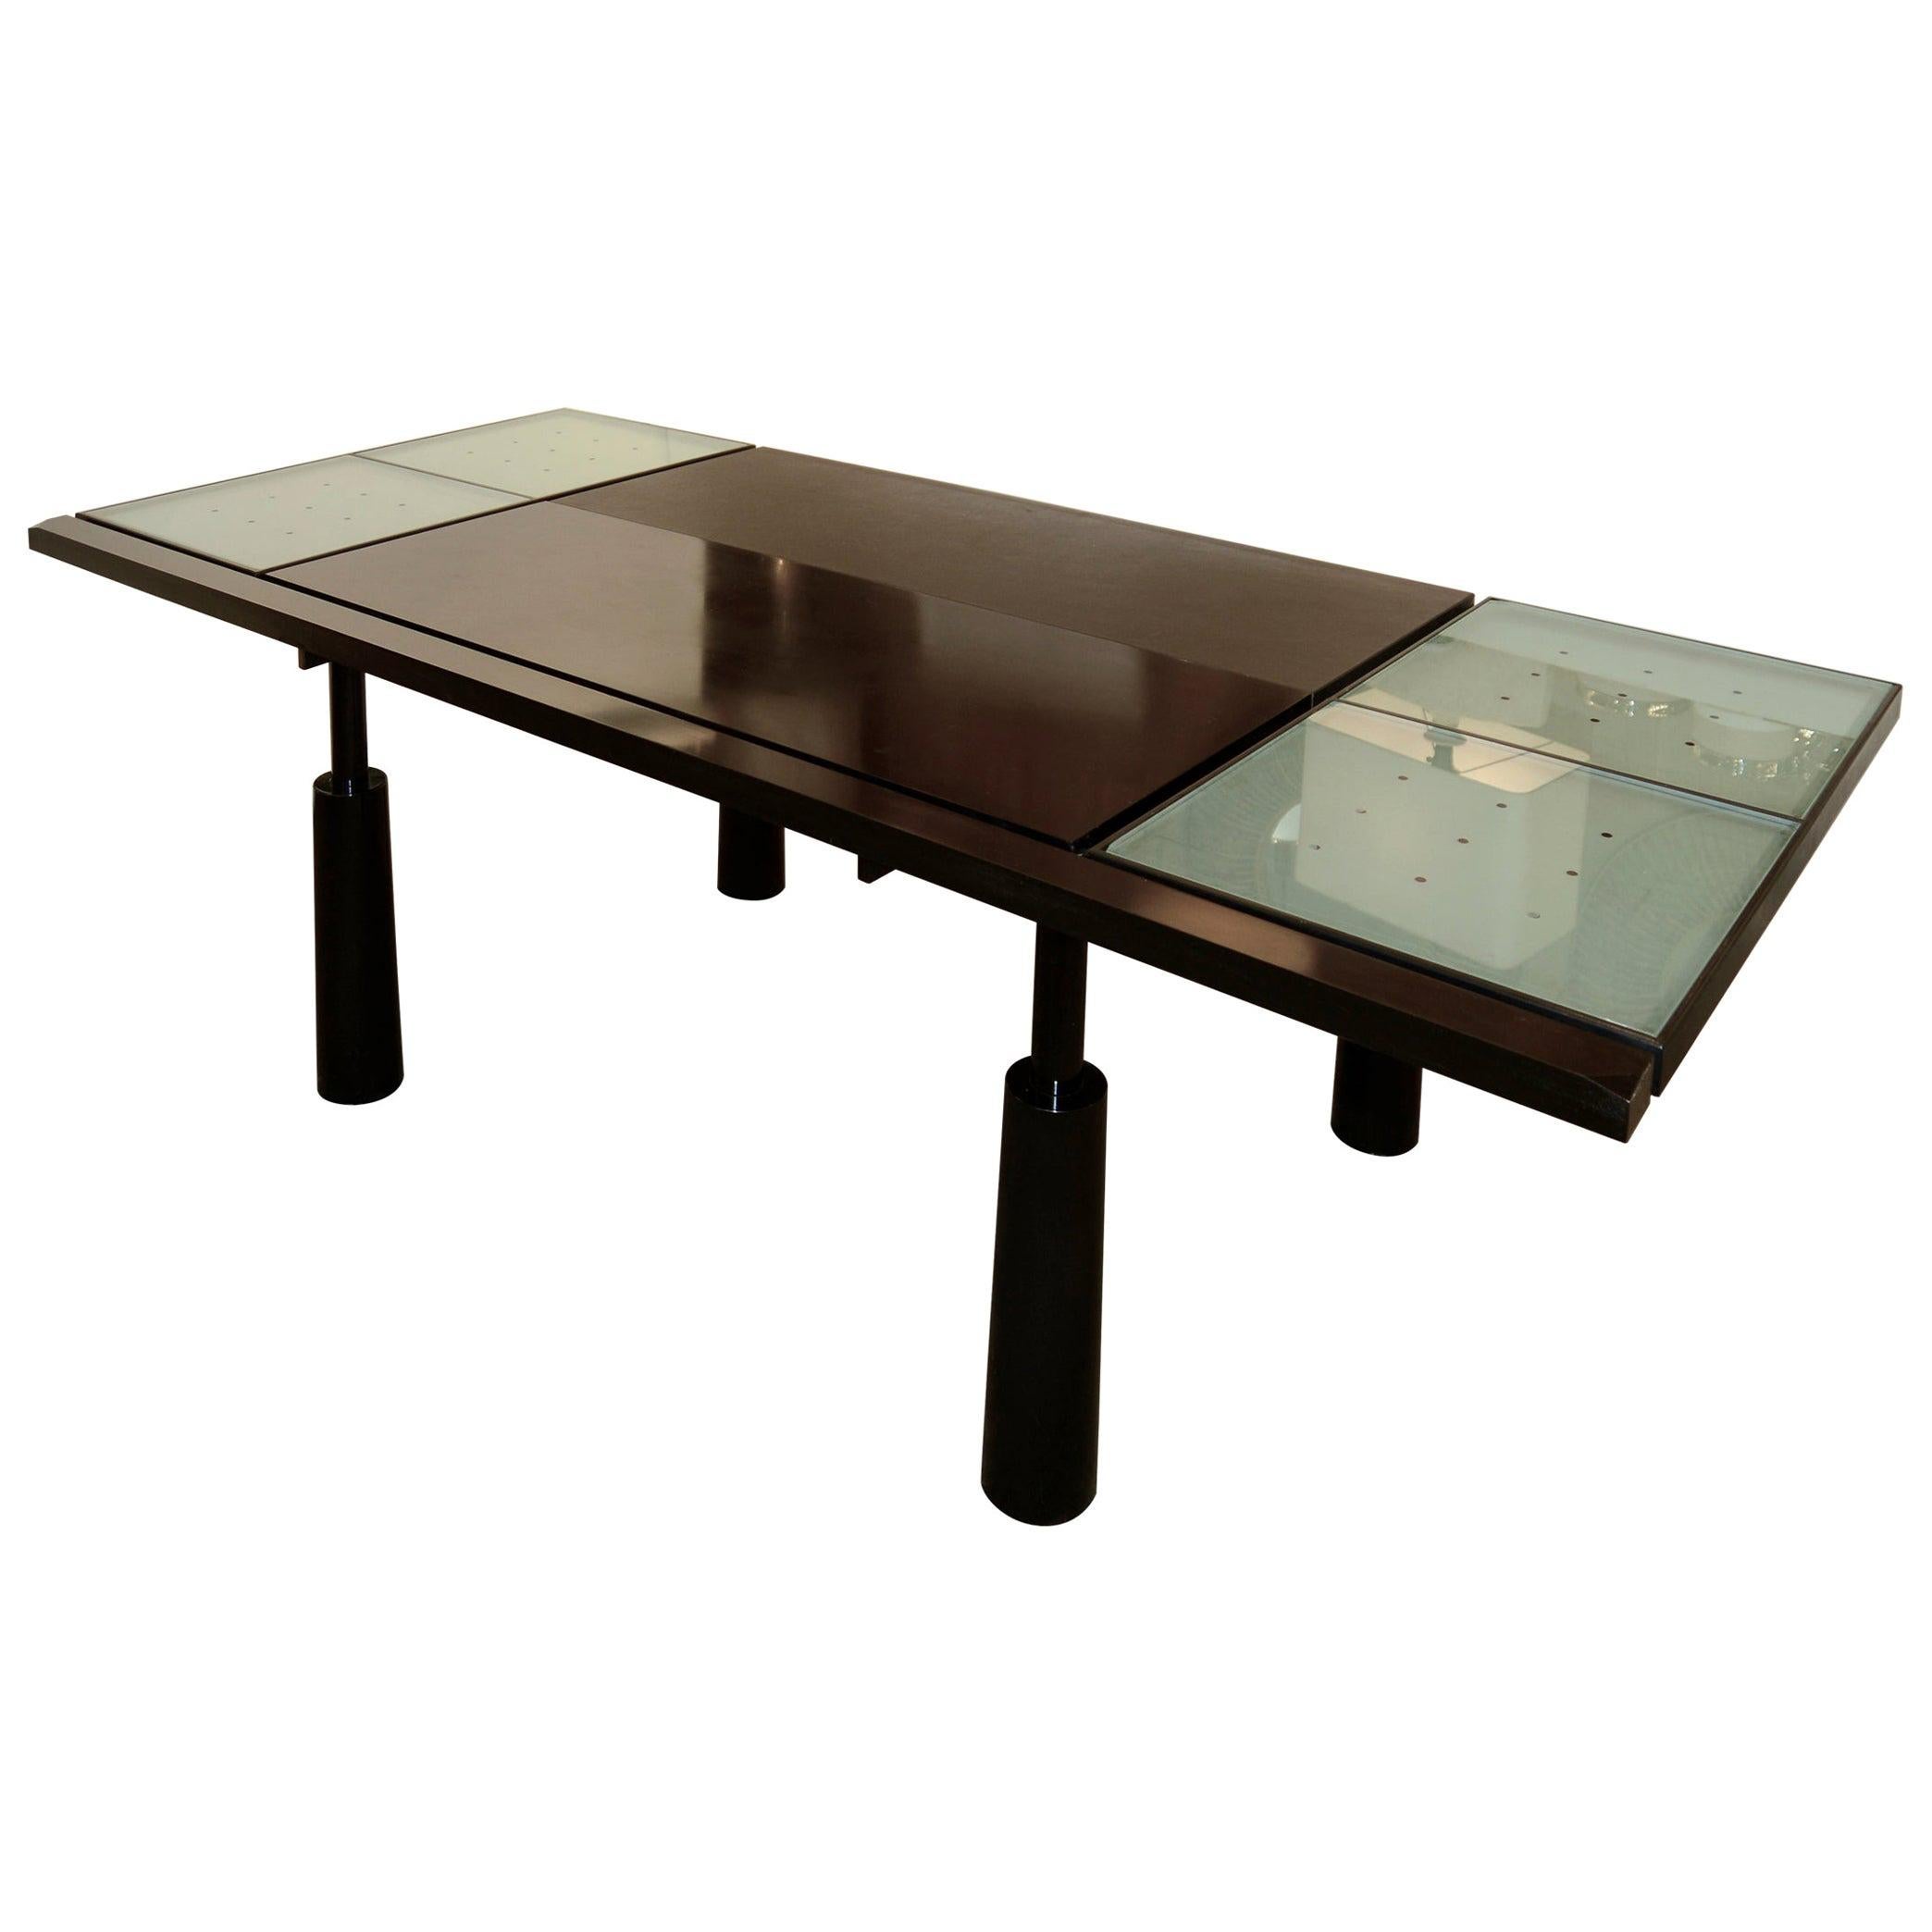 Vintage French Jean-Louis Berthet Mosais Leather Metal/Bronze/Glass Dining Table For Sale